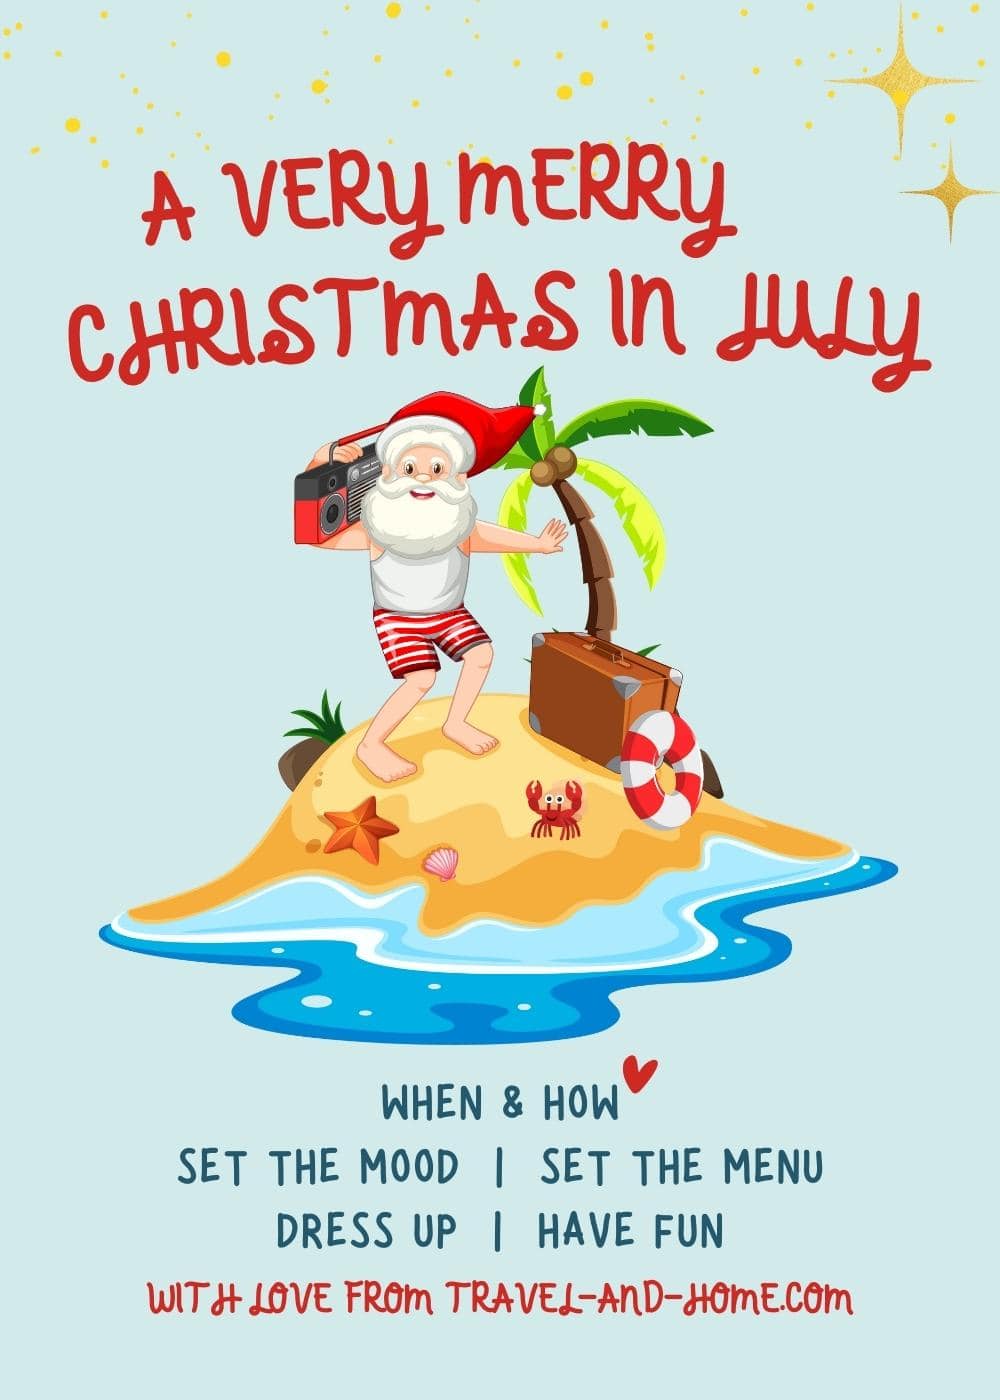 Christmas in July summer party ideas min